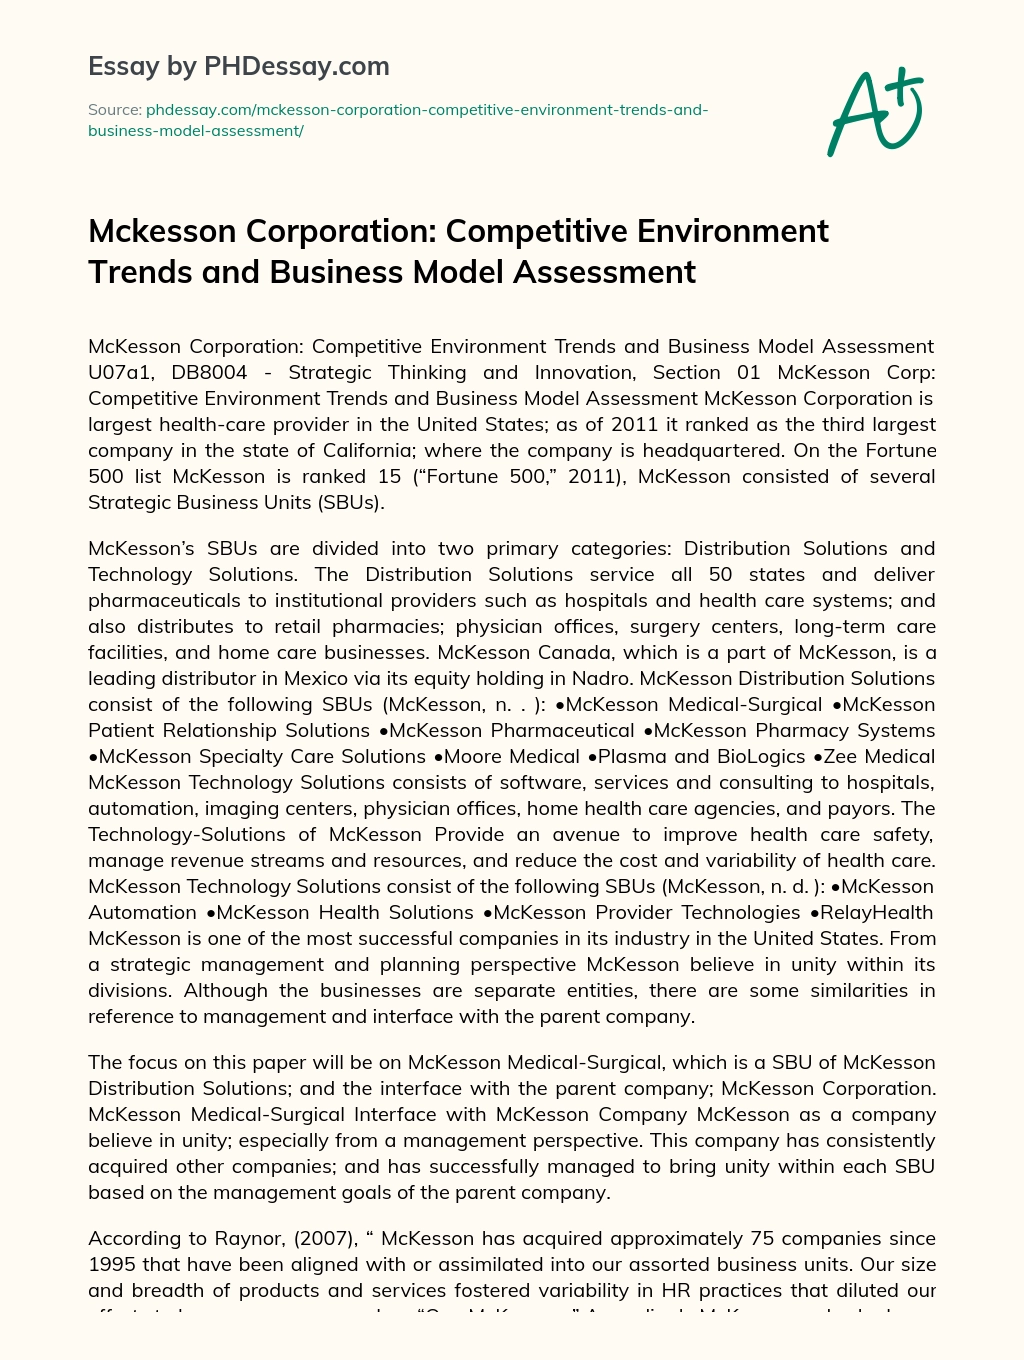 Mckesson Corporation: Competitive Environment Trends and Business Model Assessment essay